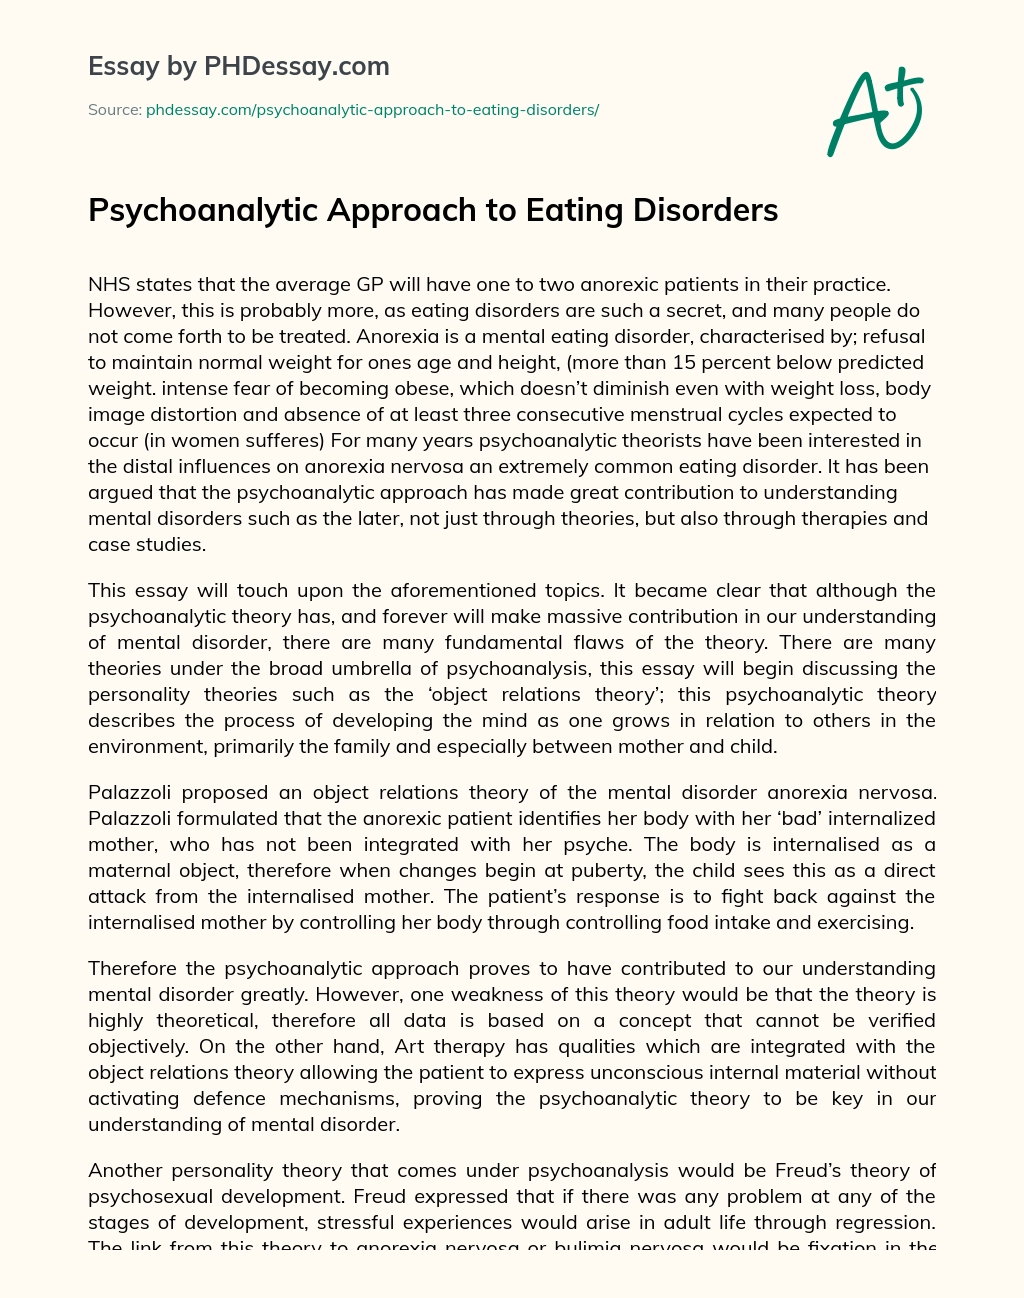 Psychoanalytic Approach to Eating Disorders essay